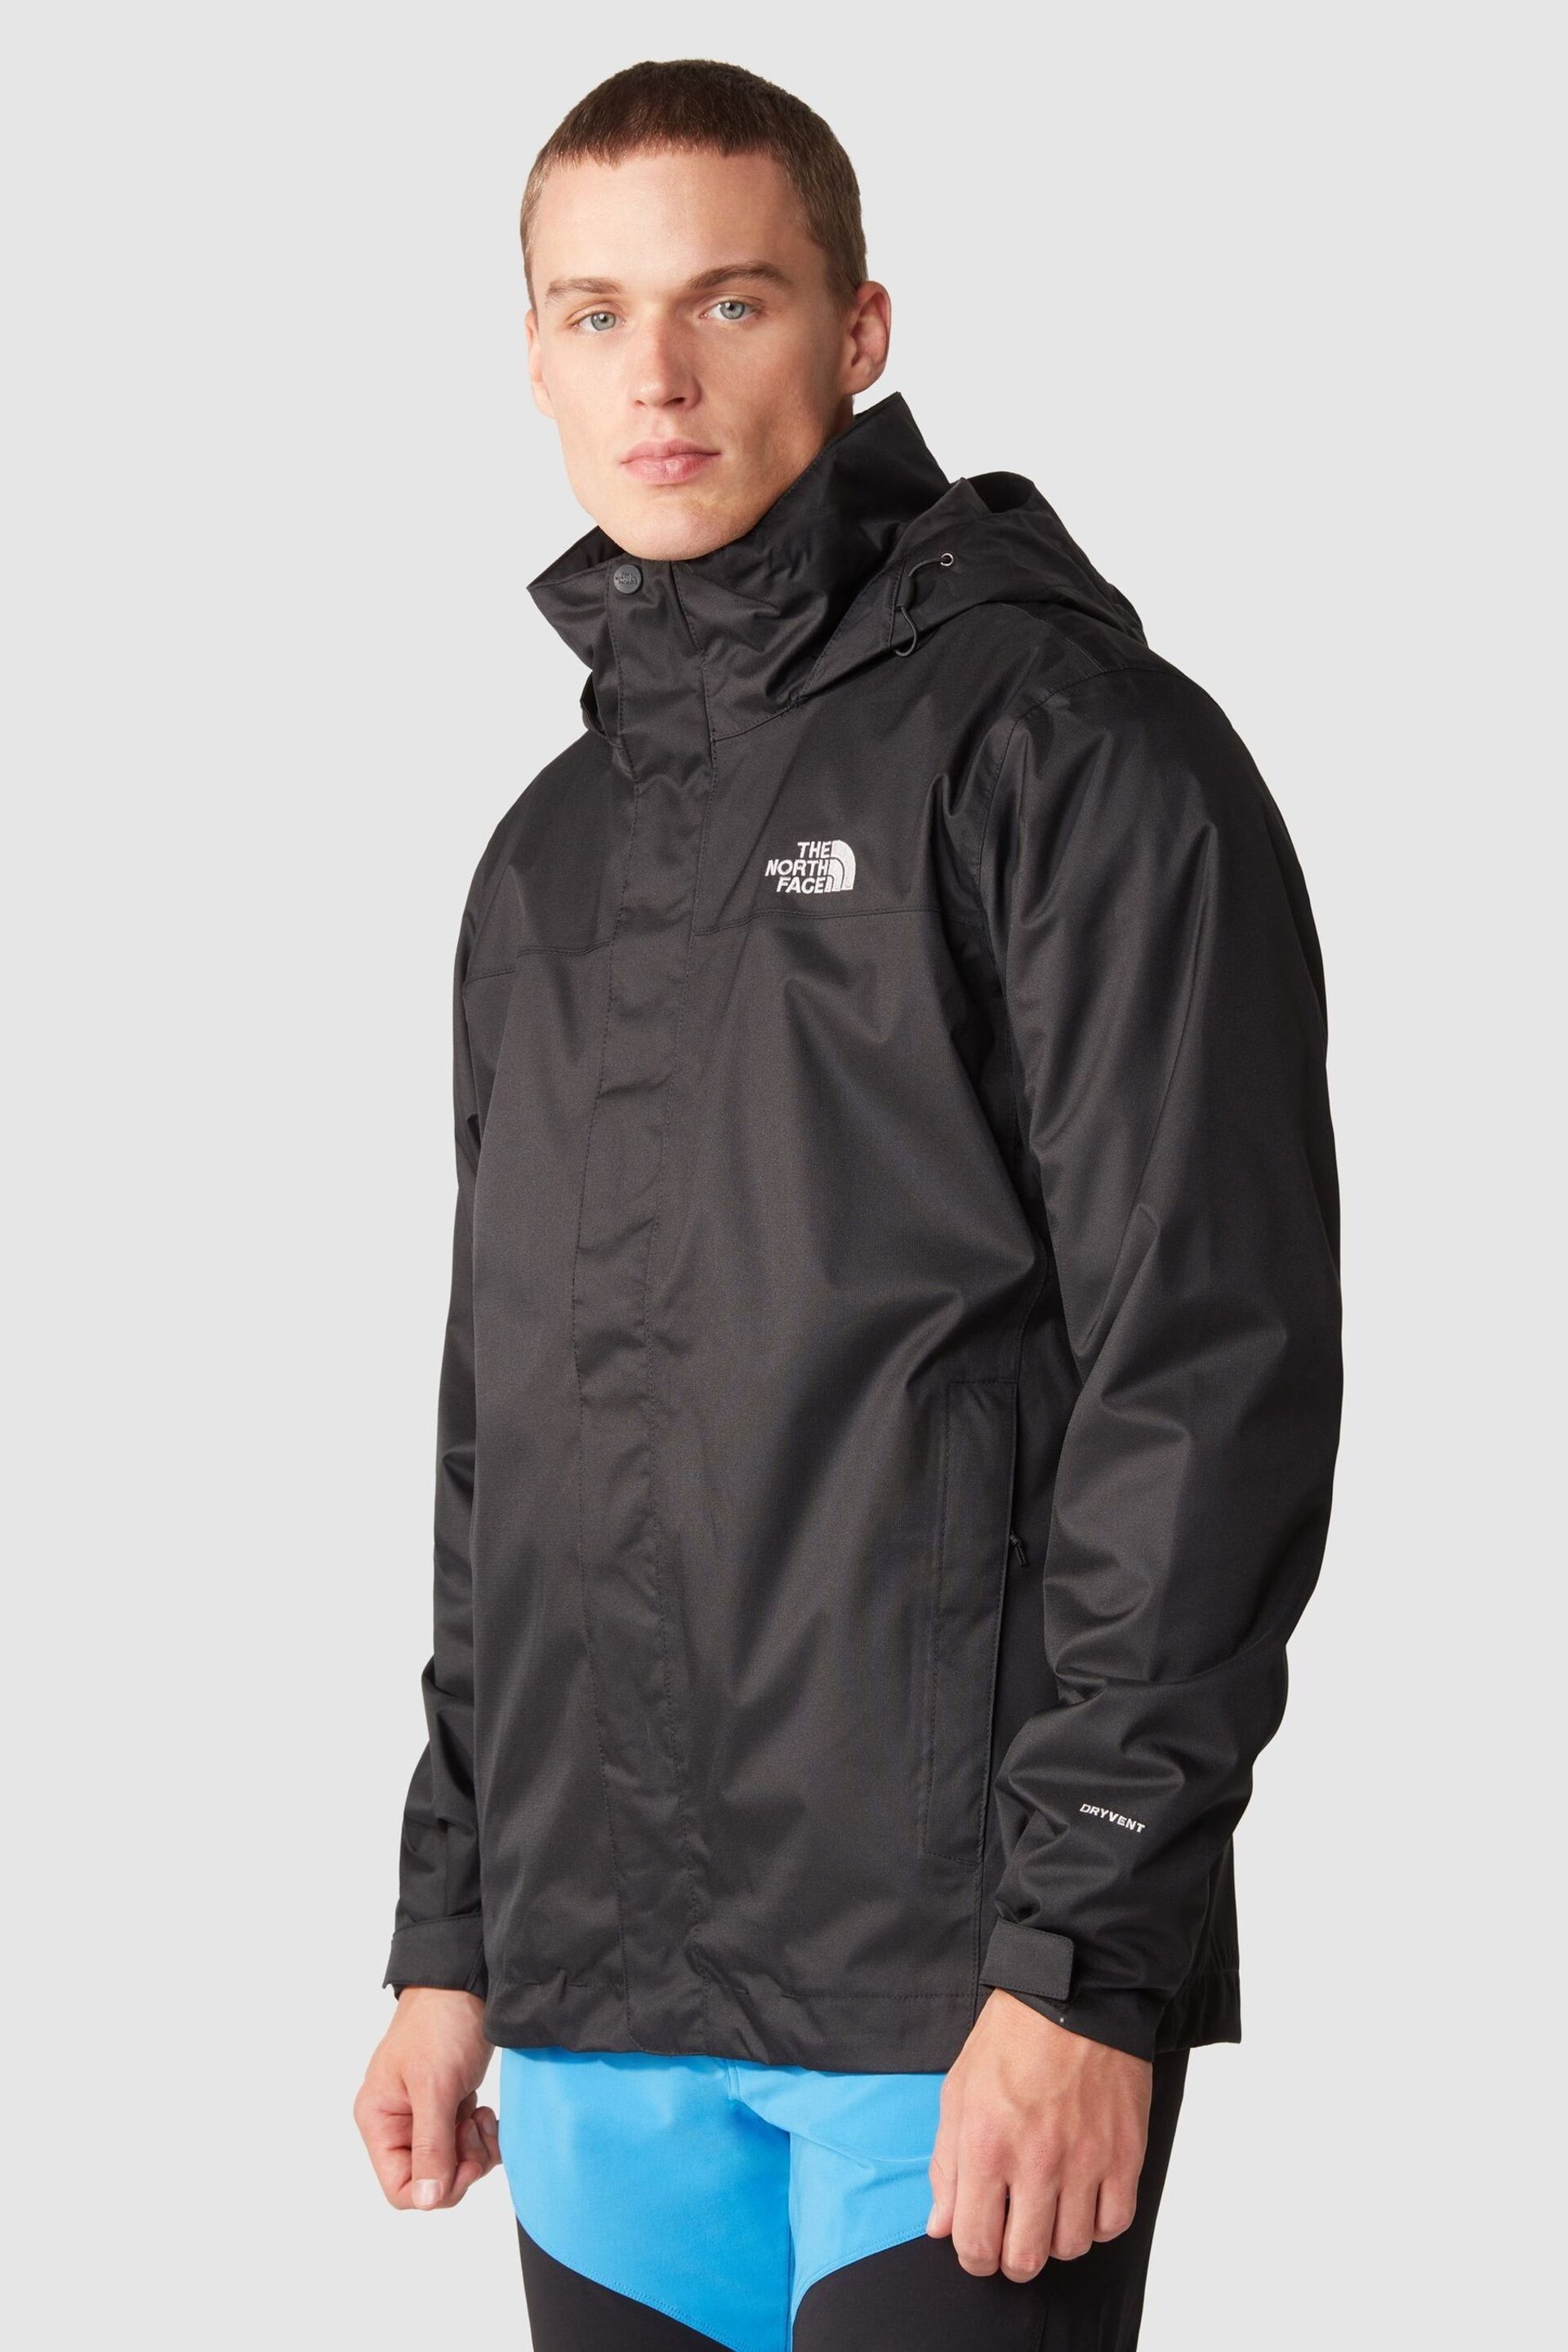 The North Face Black Evolve II Triclimate® Jacket - Image 1 of 7